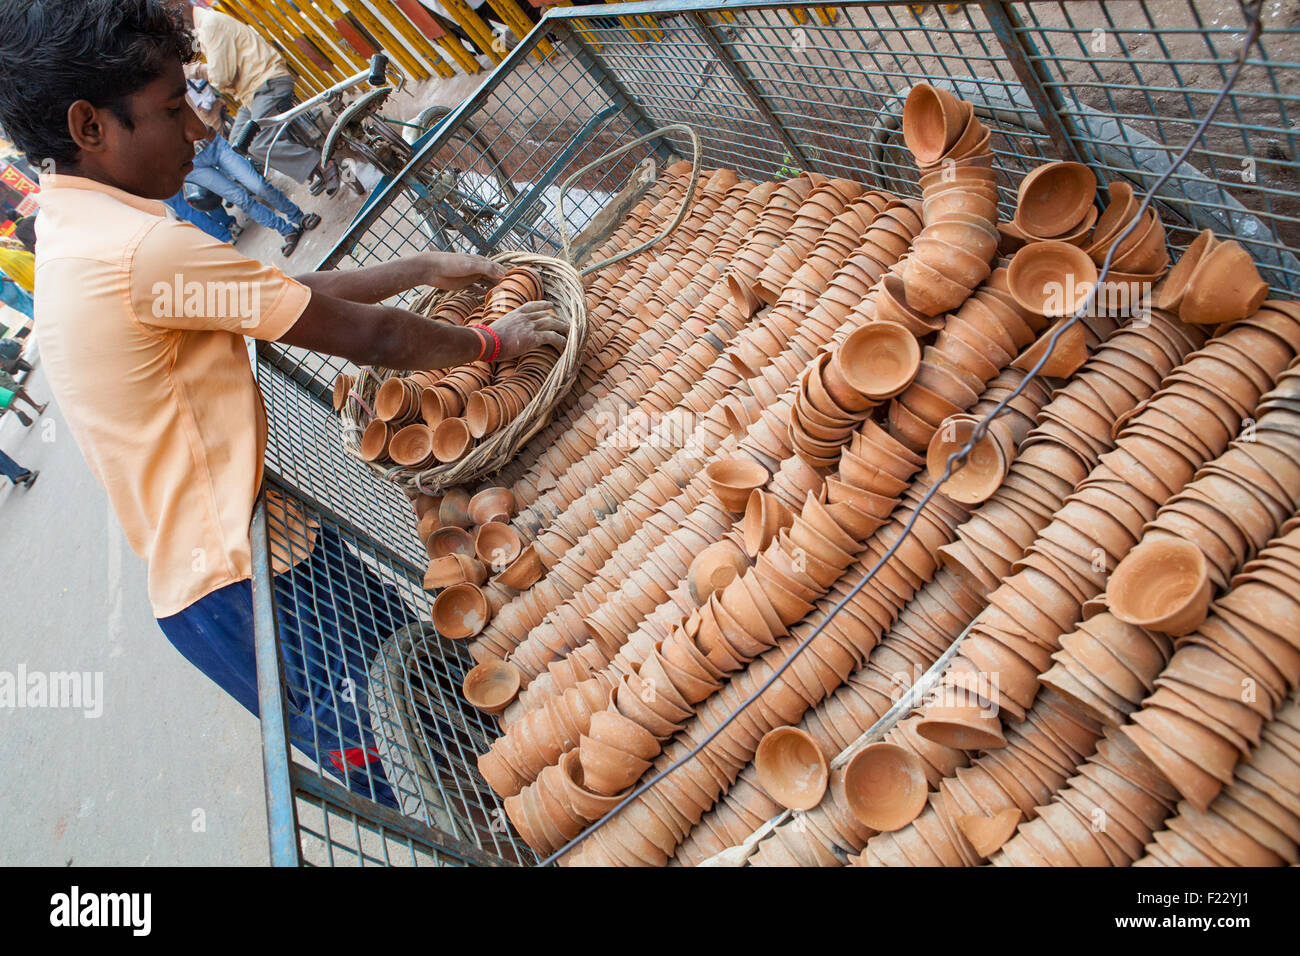 A teenage boy loads bicycle-drawn cart with clay cups (used for tea) Stock Photo